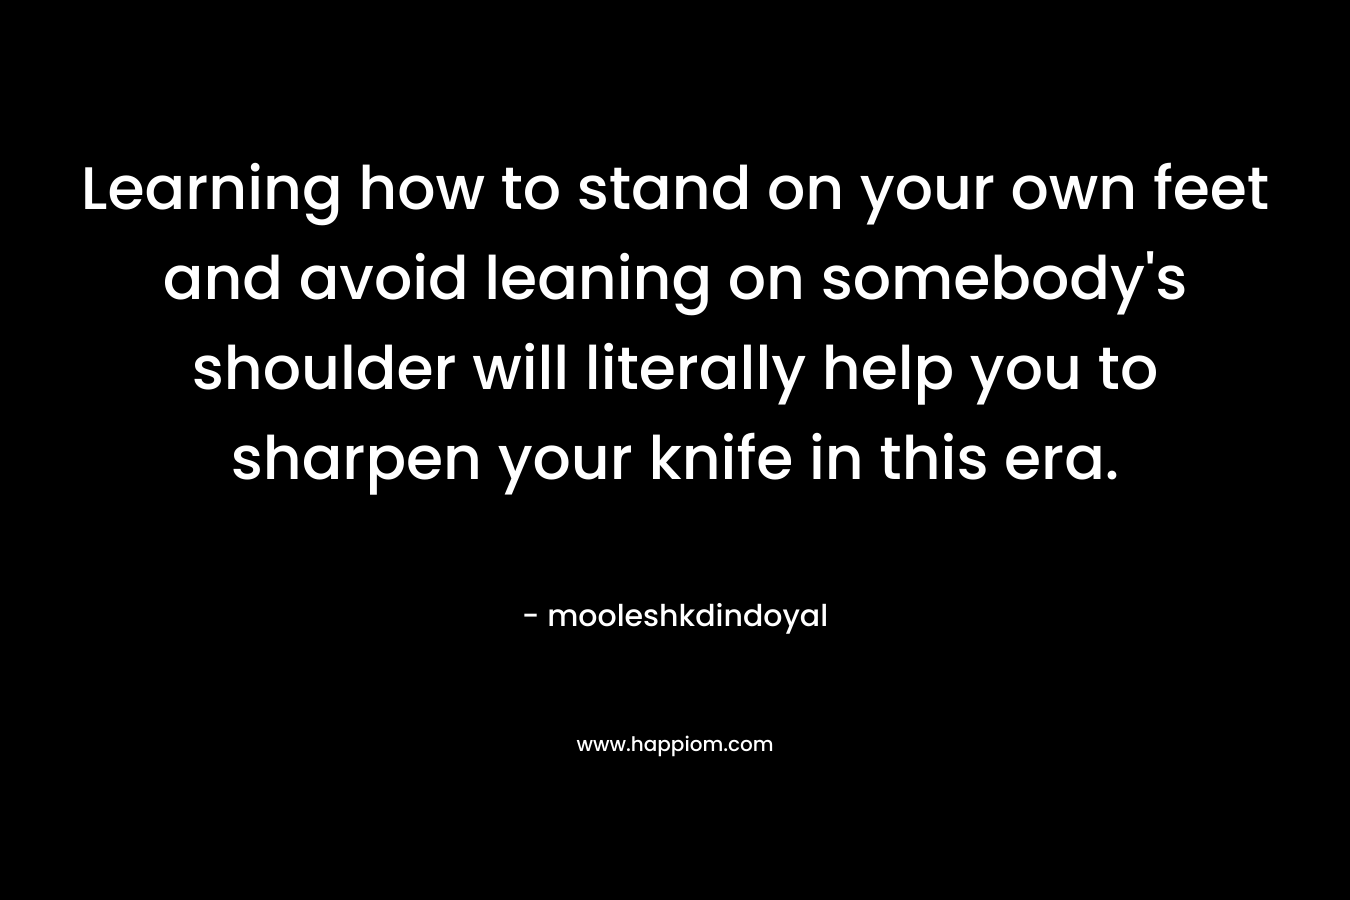 Learning how to stand on your own feet and avoid leaning on somebody’s shoulder will literally help you to sharpen your knife in this era. – mooleshkdindoyal